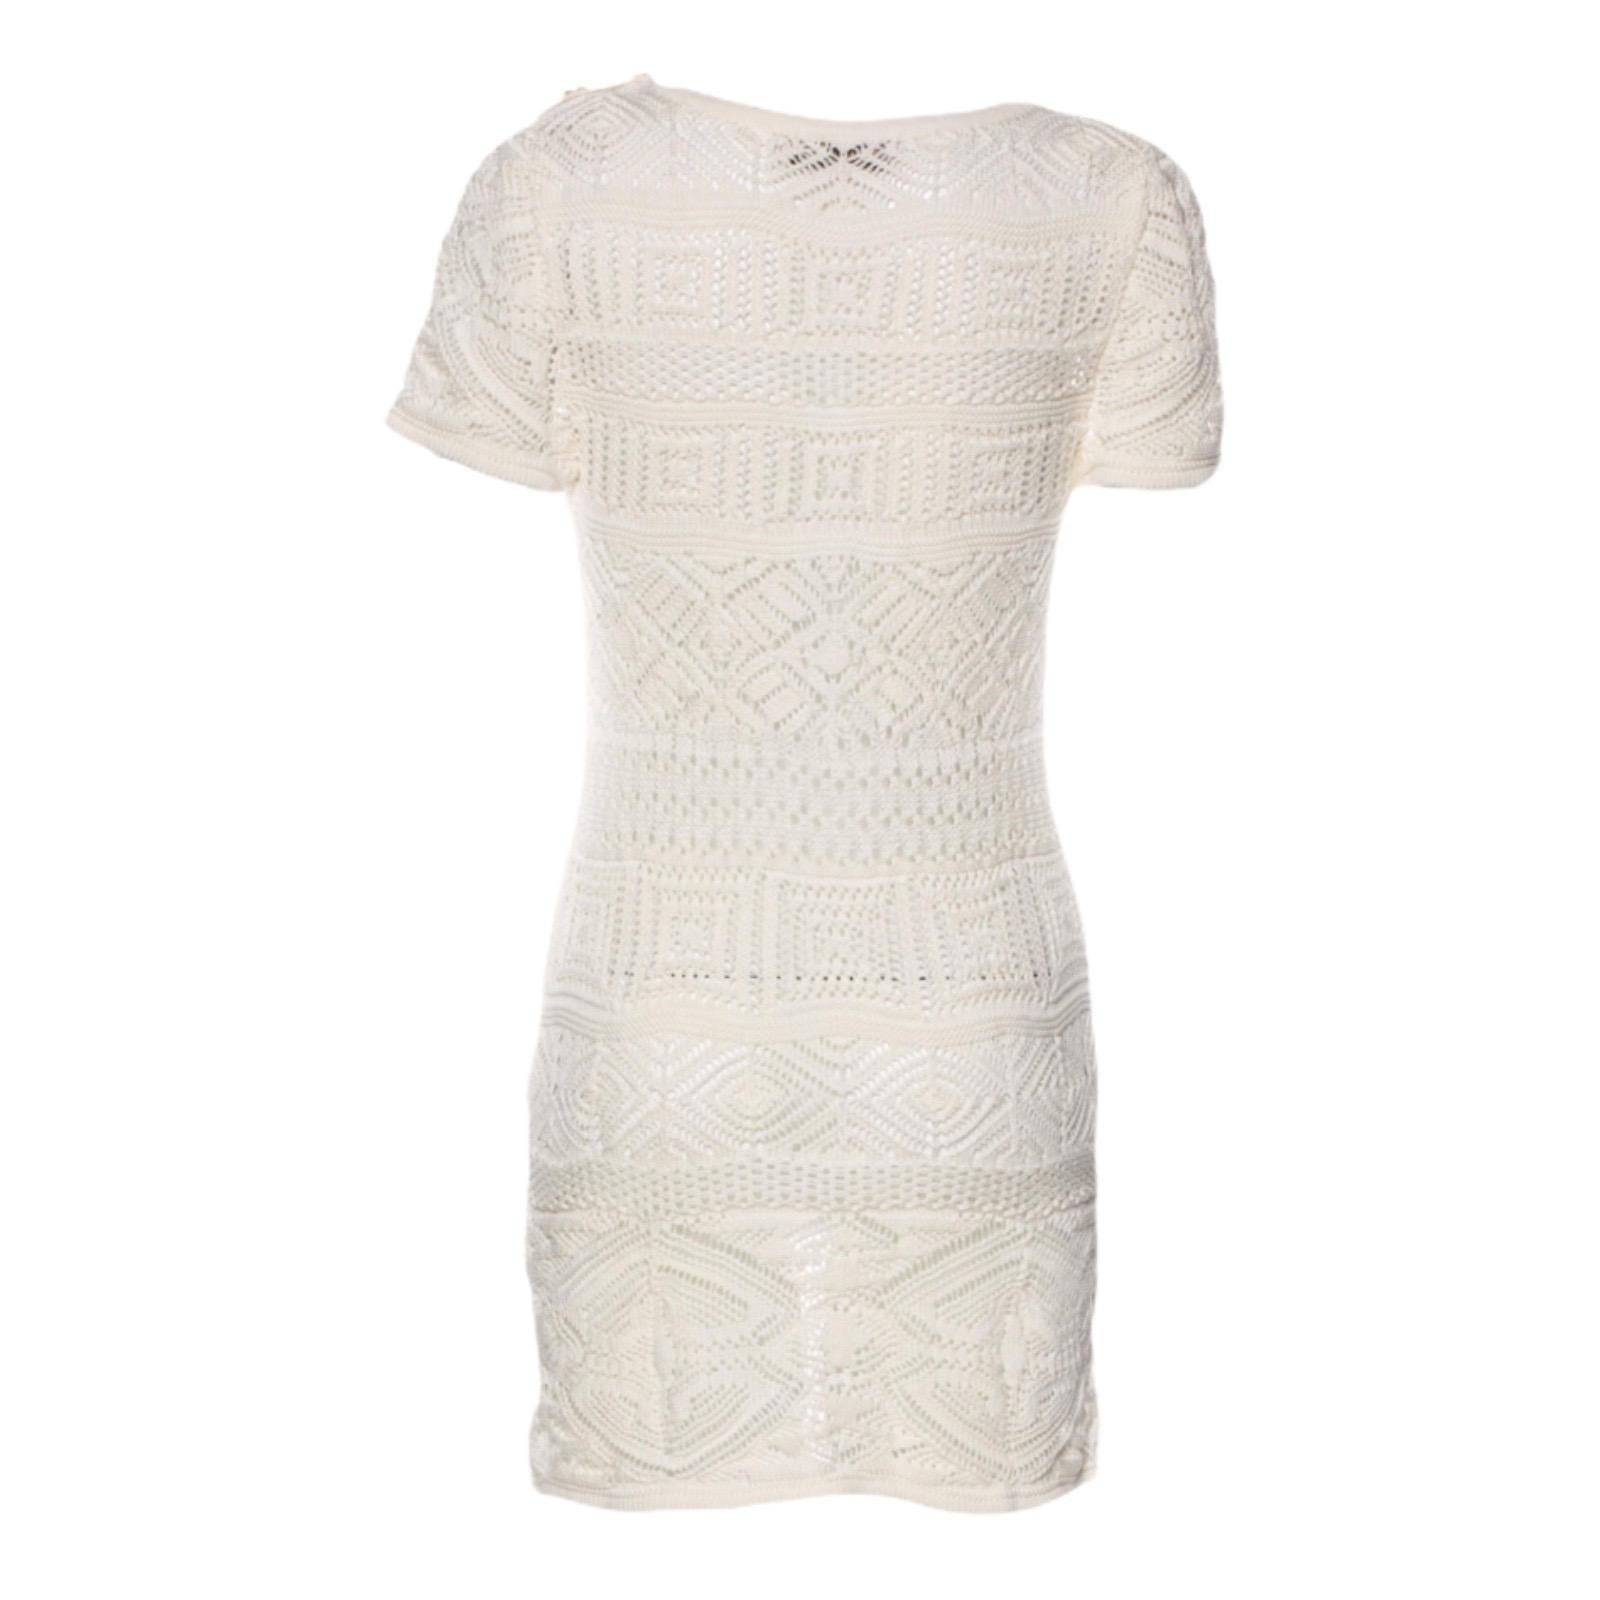 Emilio Pucci's cotton dress is perfect for poolside lounging. This crocheted style has a button-detailed shoulder. Wear it with sandals and oversized sunglasses.

Beautiful Emilio Pucci Mini Dress
Button-style shoulder detail
Simply slips on
Fits US